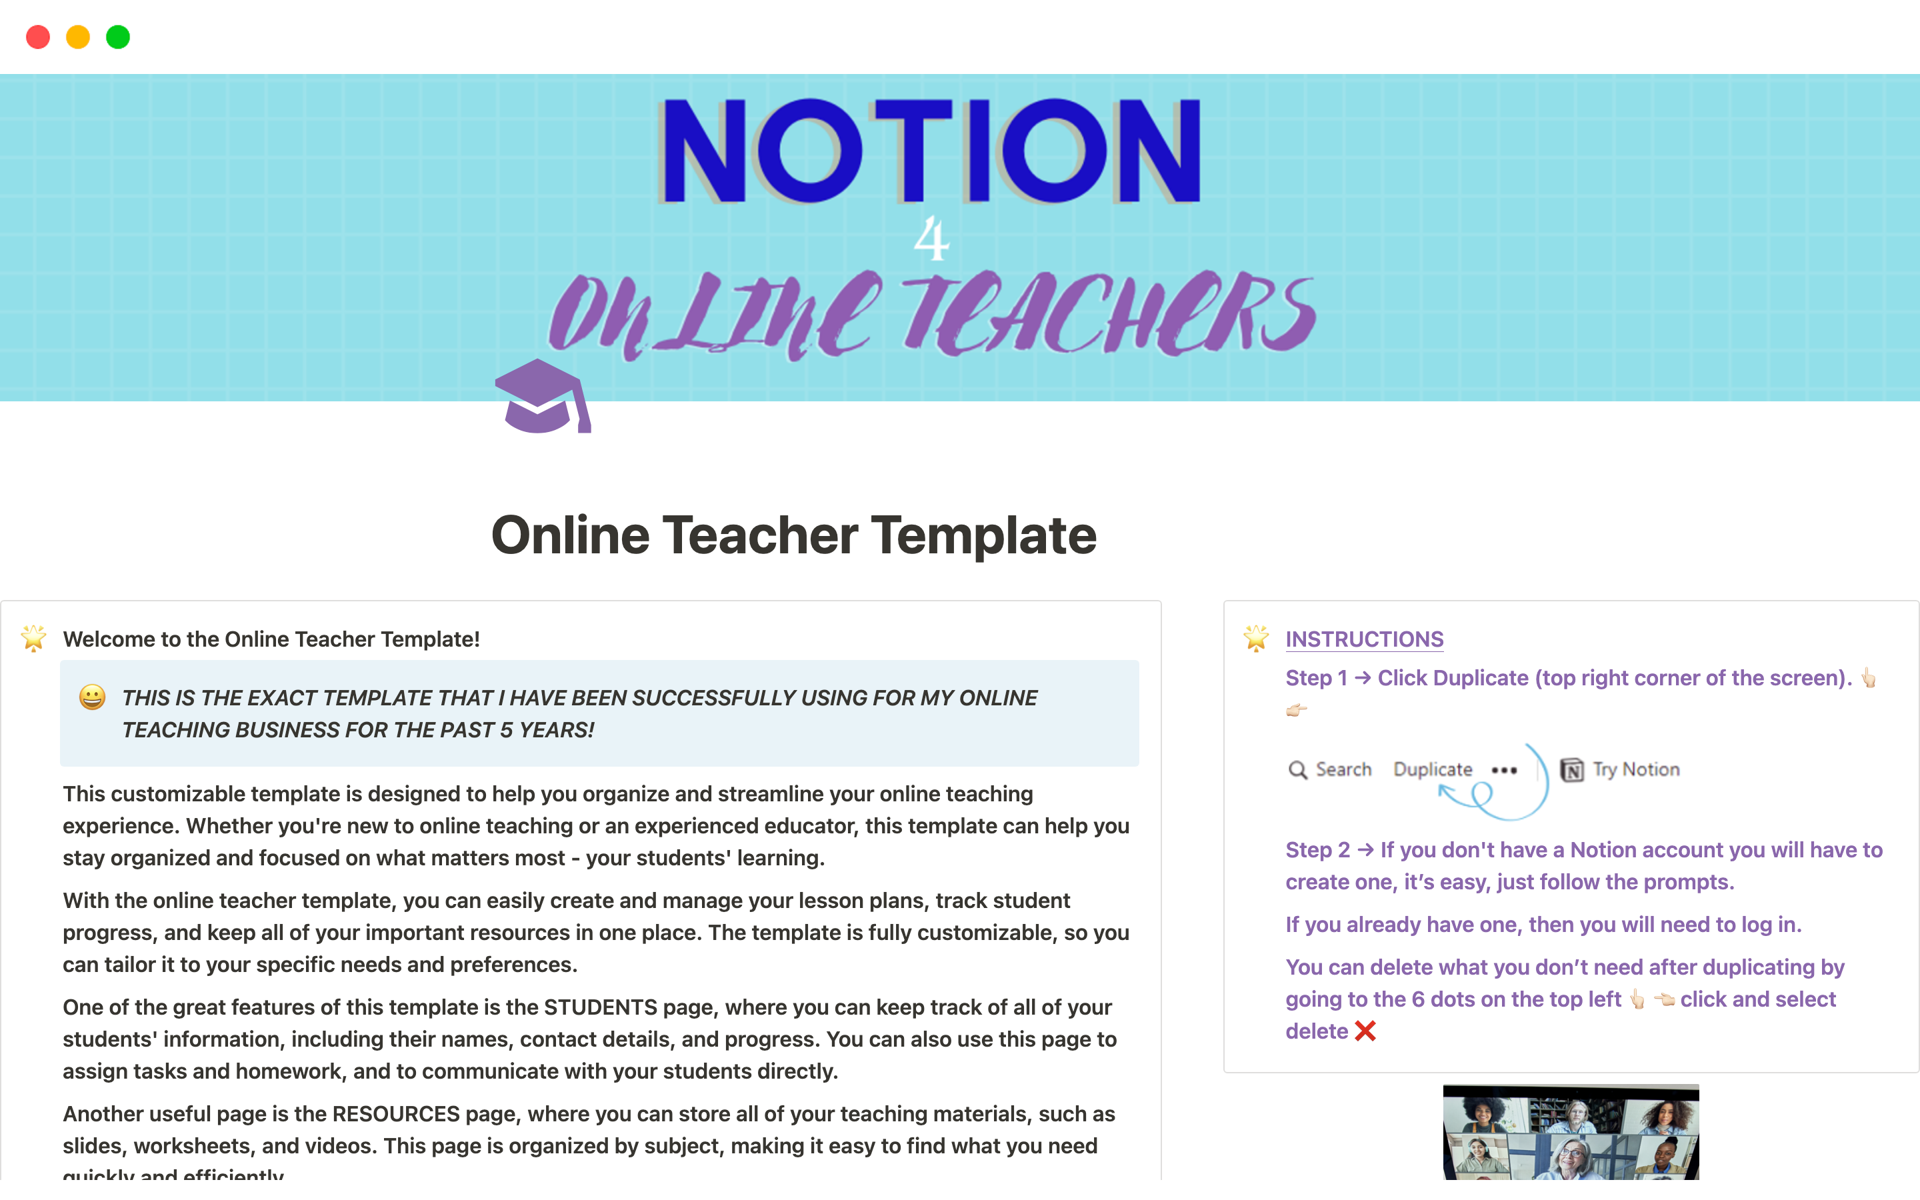 Notion 4 Online Teachers - The only template you need to keep your online teaching on track!